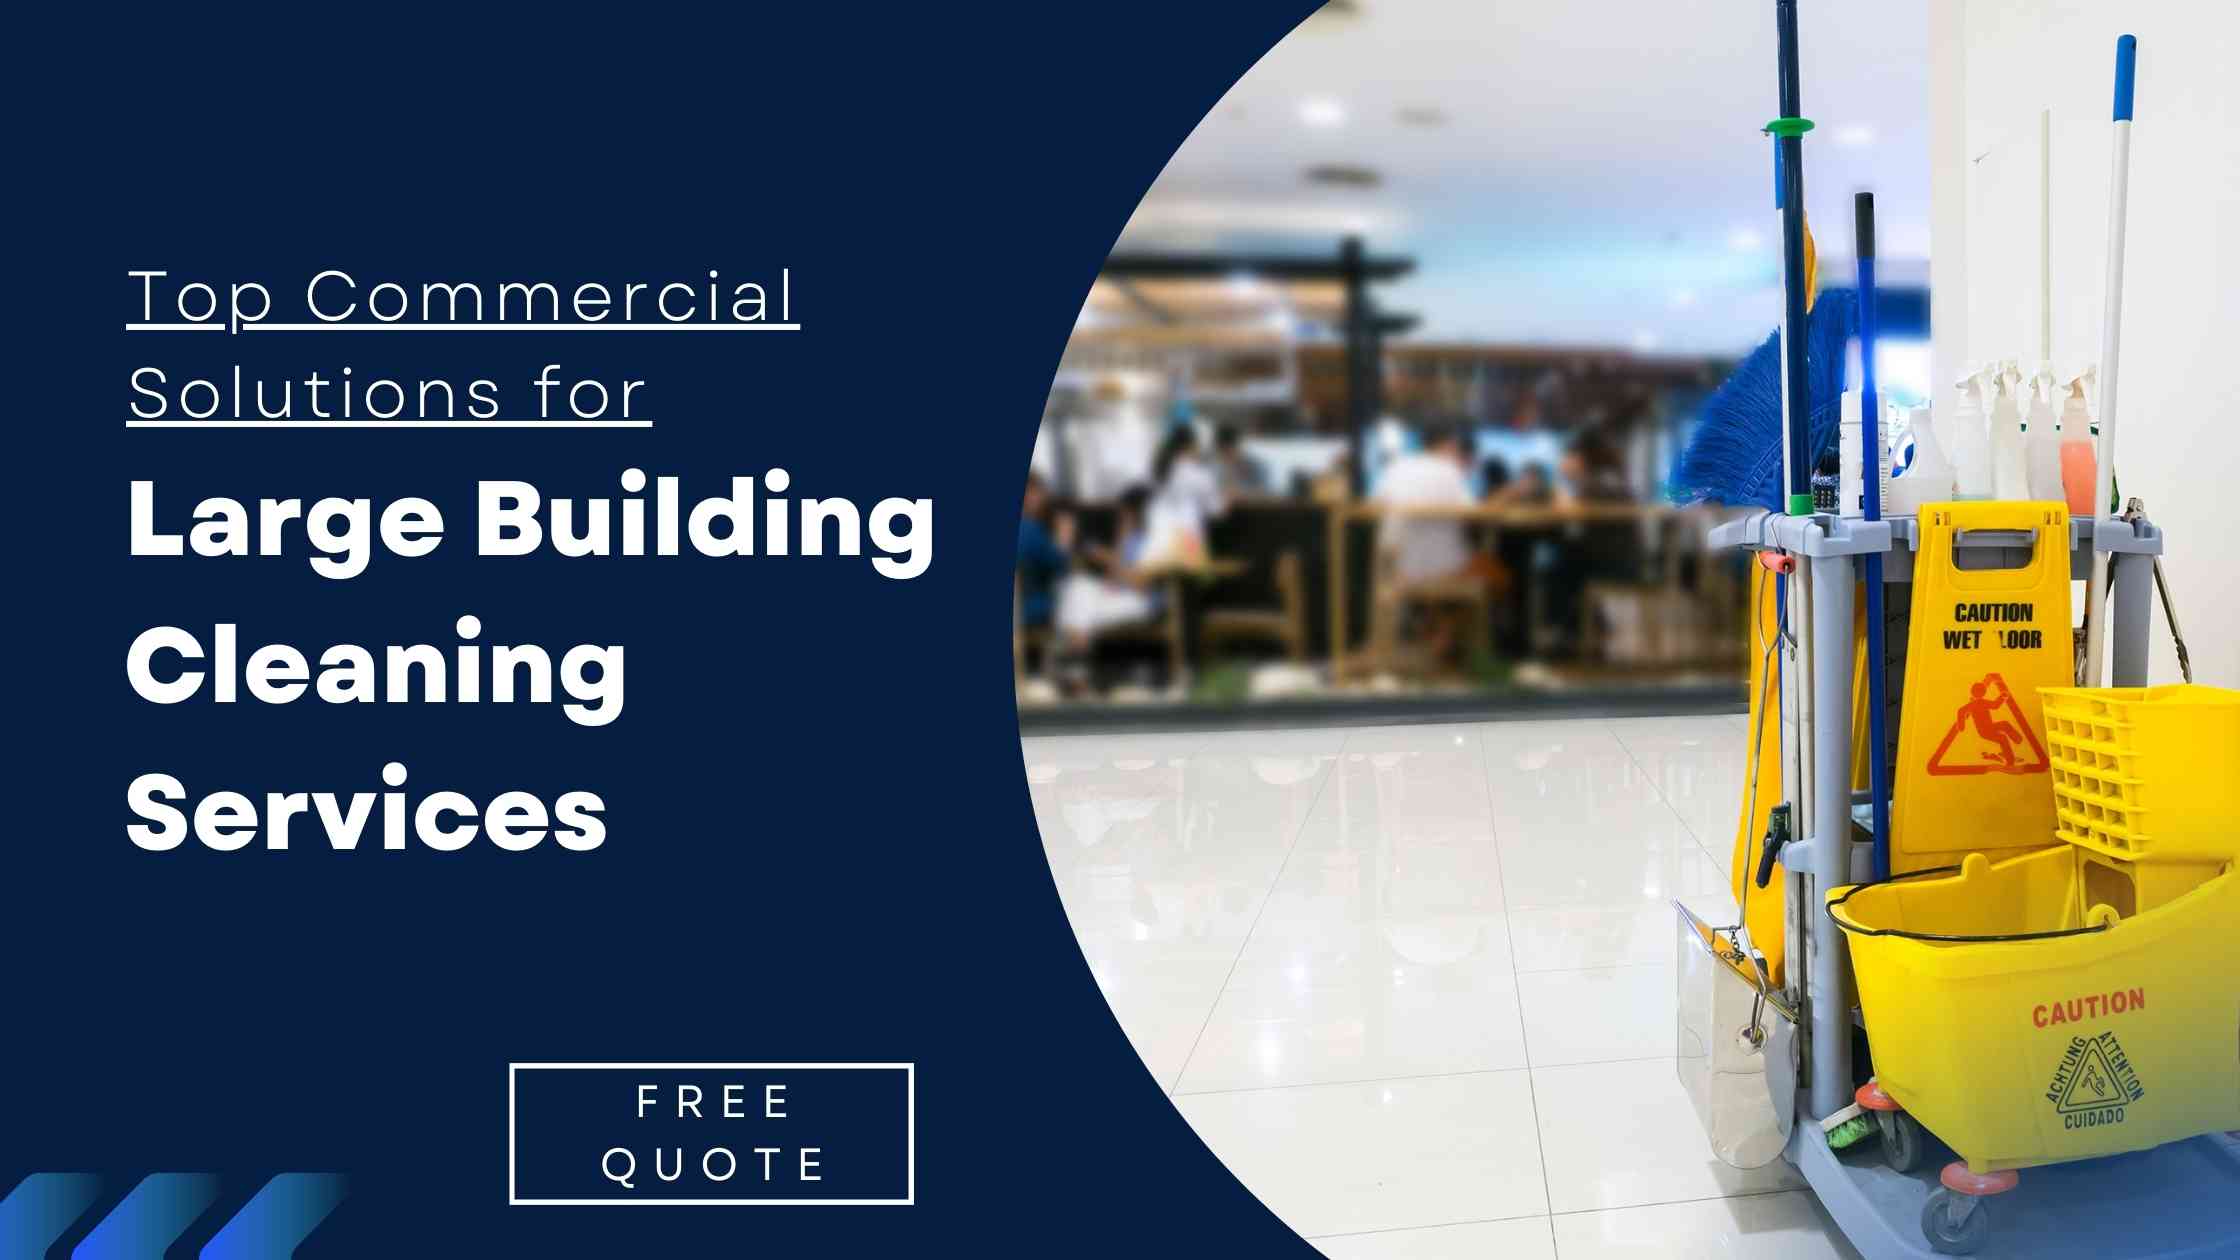 Top Commercial Solutions for Large Building Cleaning Services